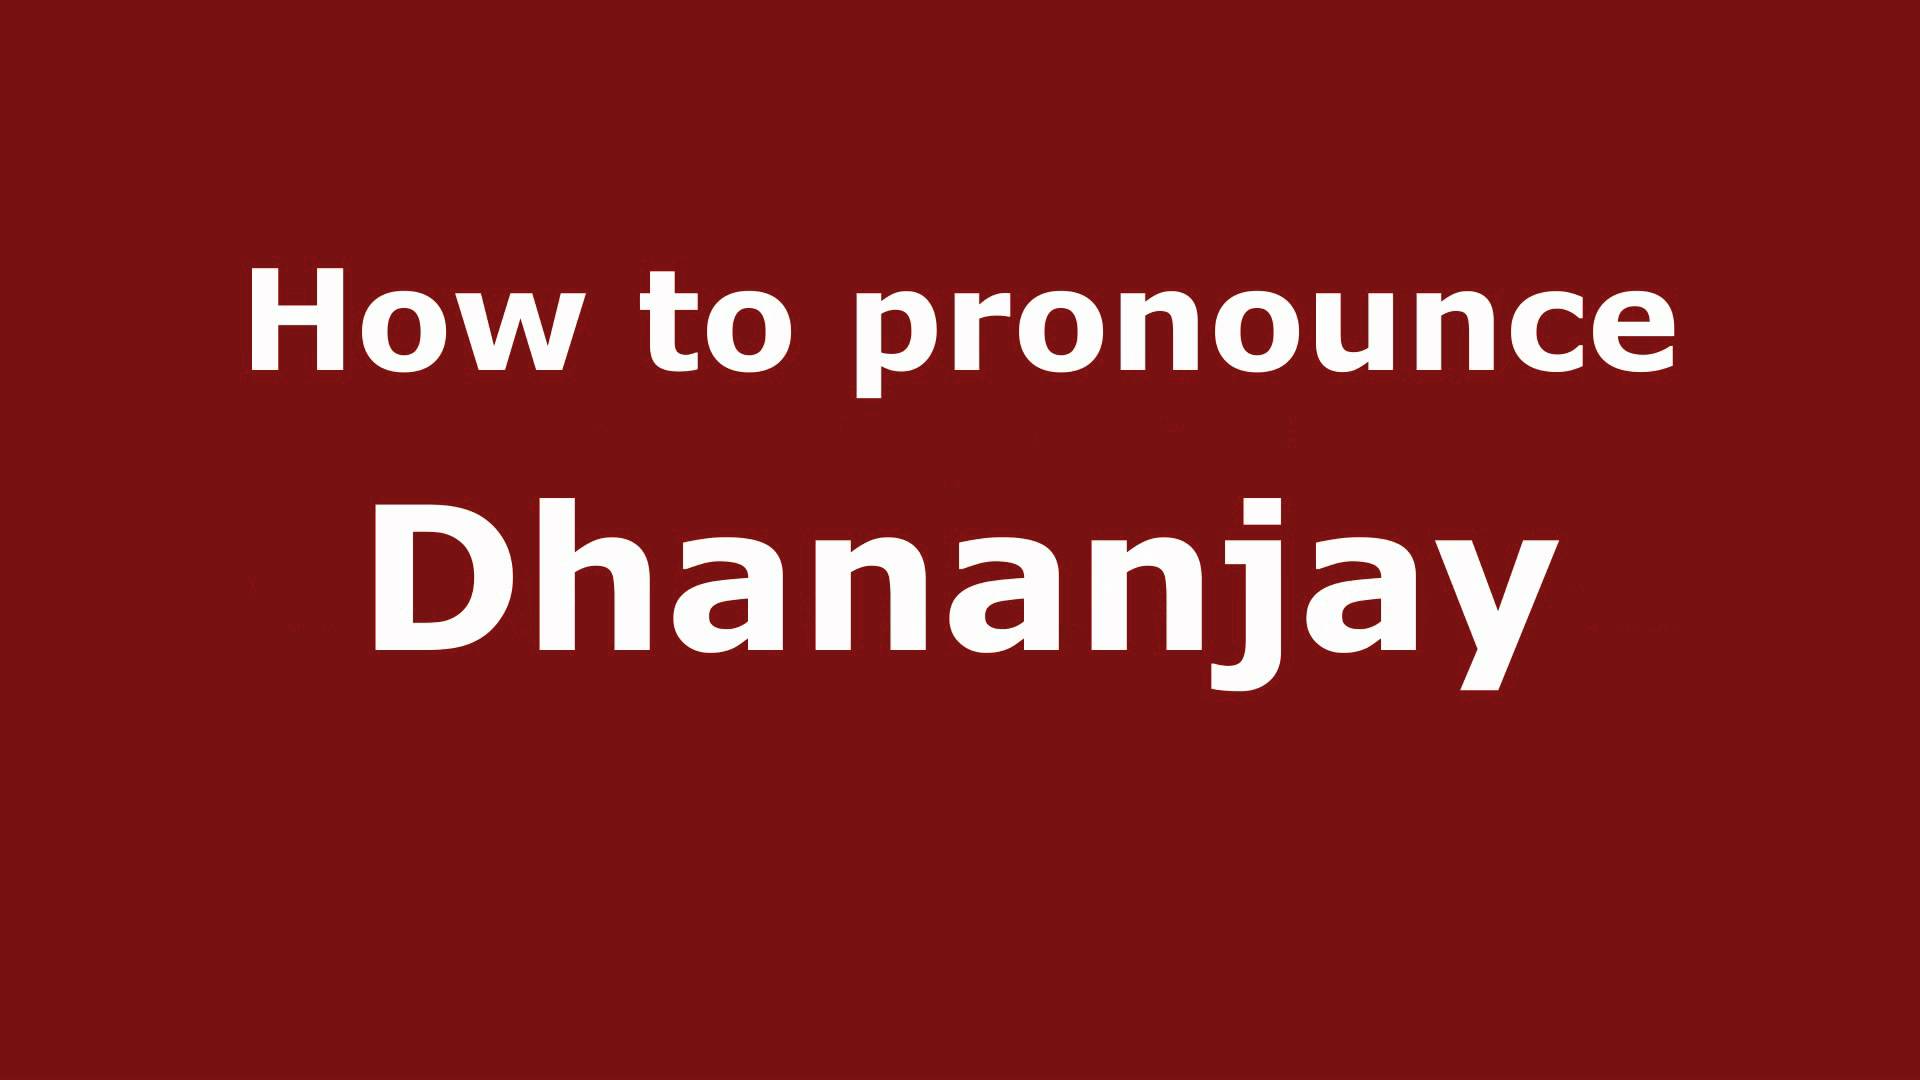 How to Pronounce Dhananjay